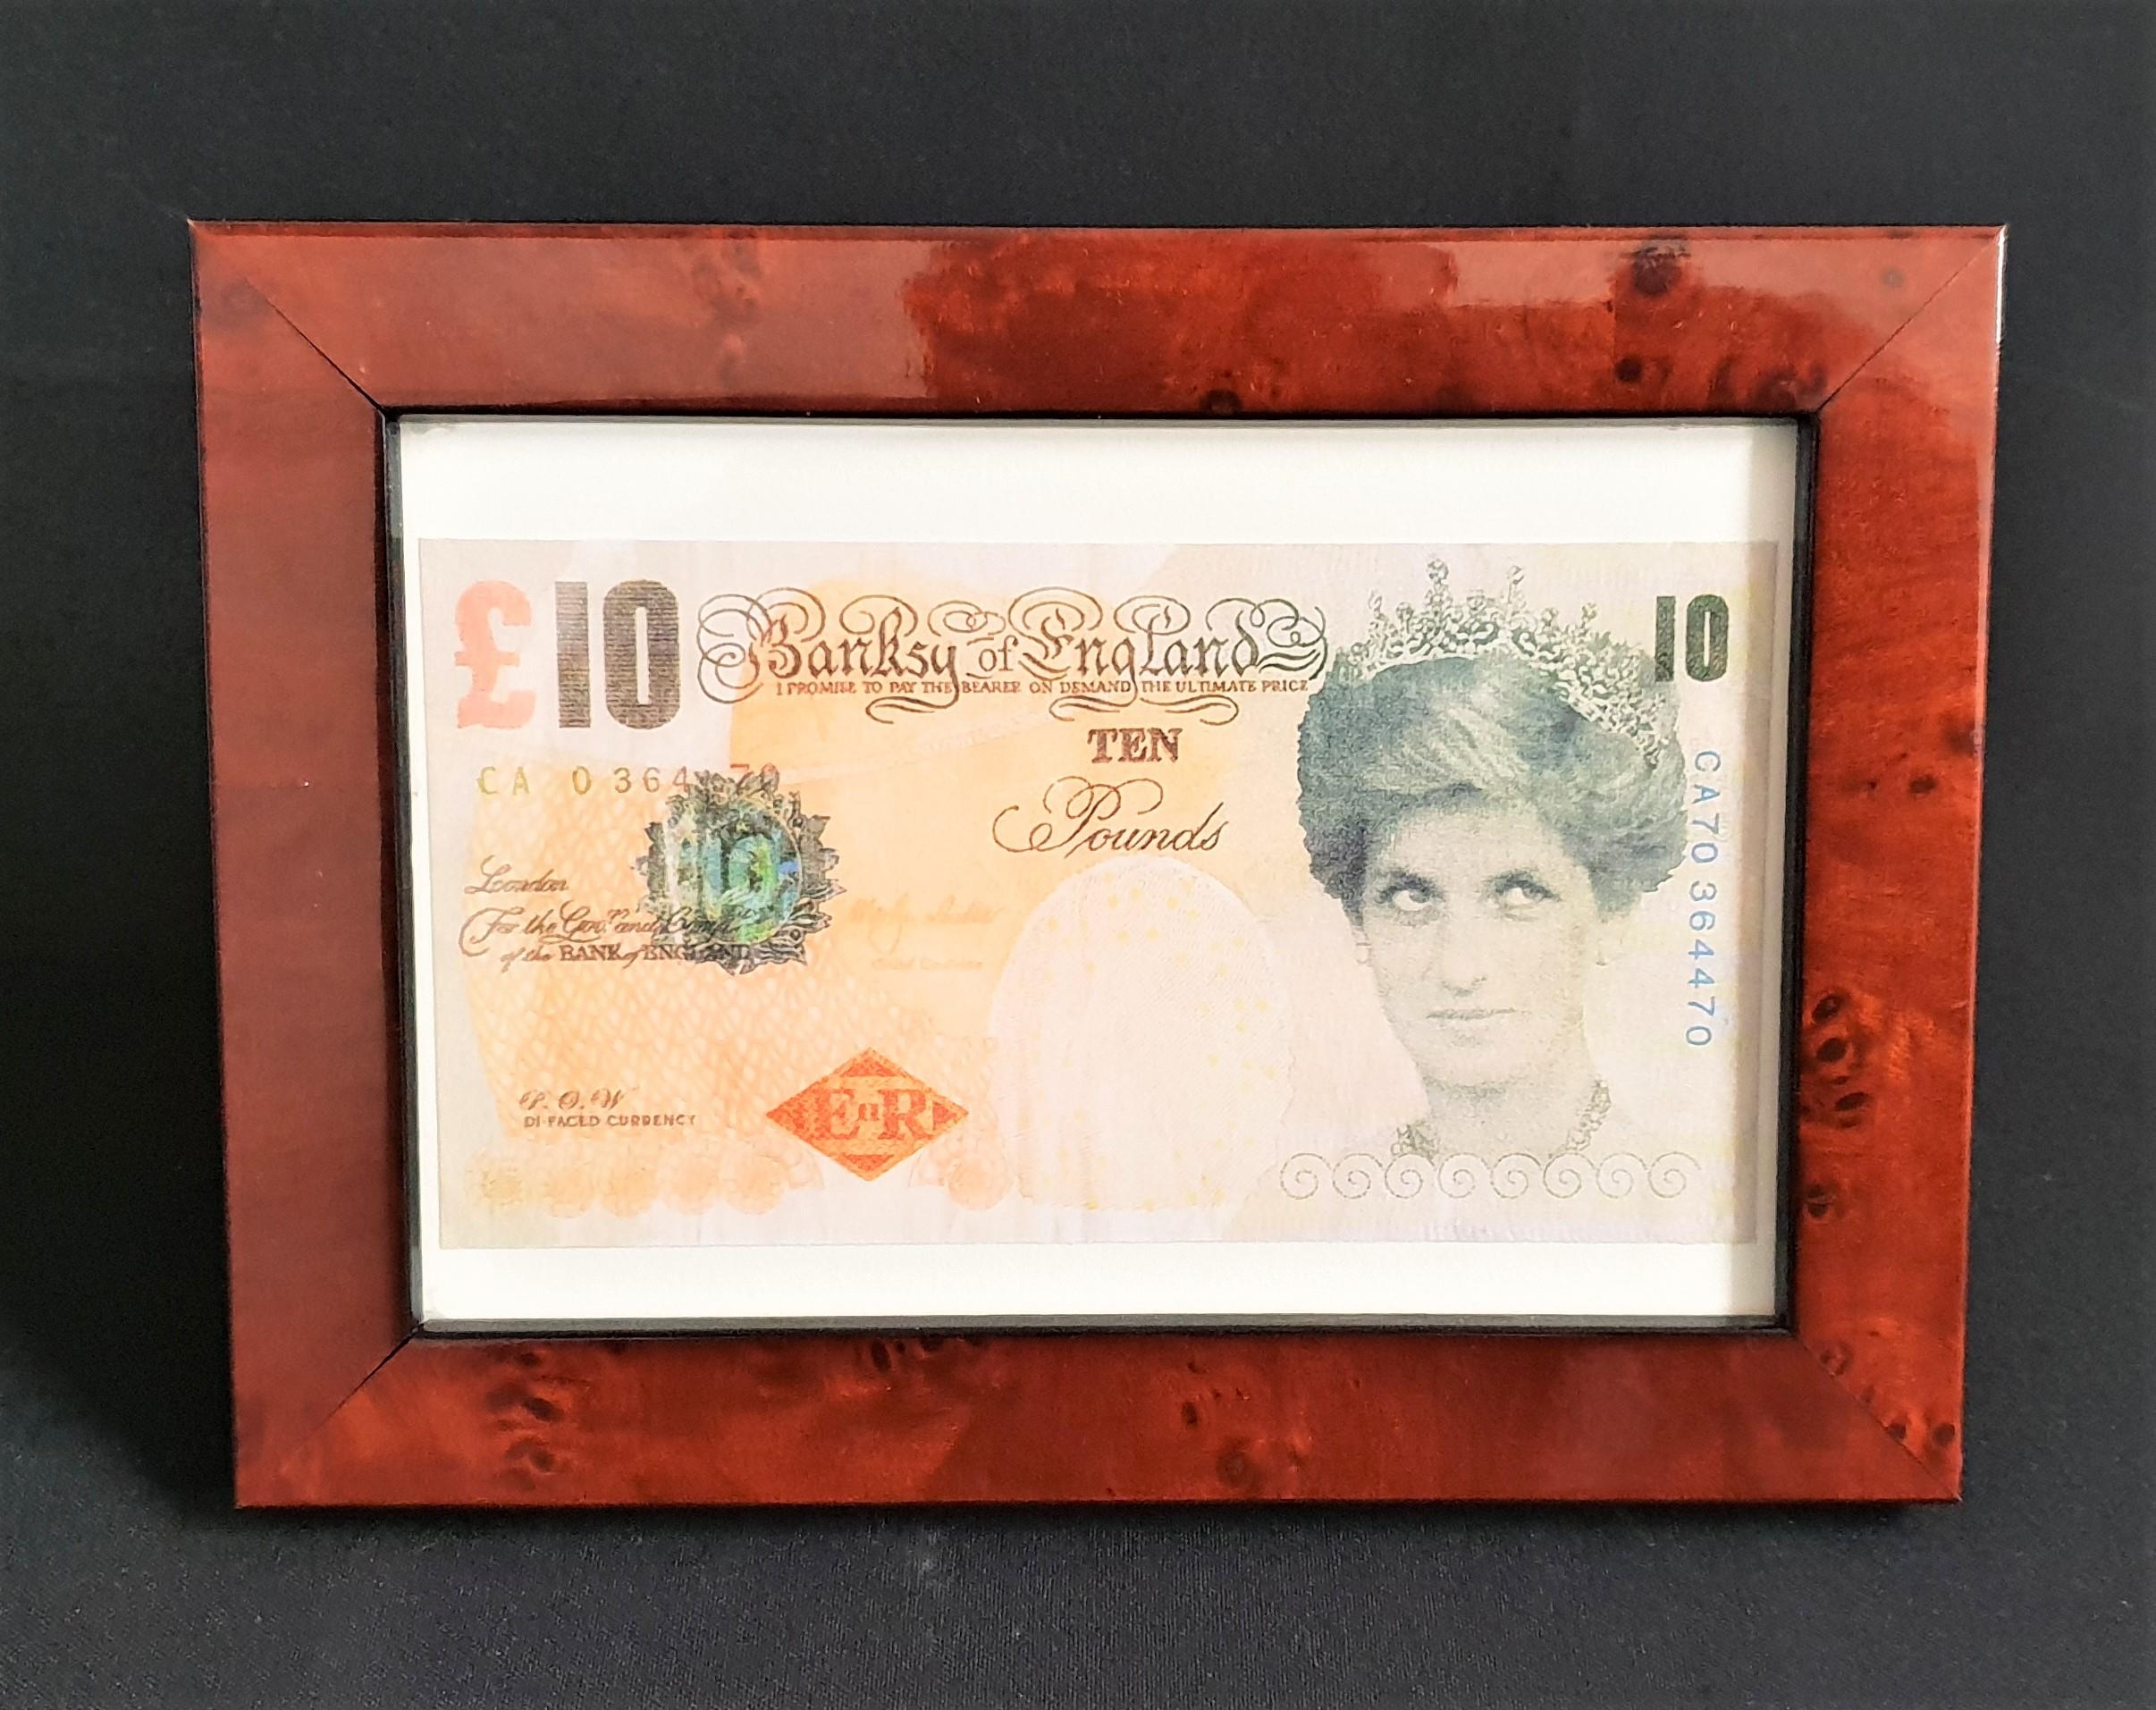 BANKSY DI-FACED £10 NOTE an original two sided Banksy note, the Queens face substituted with